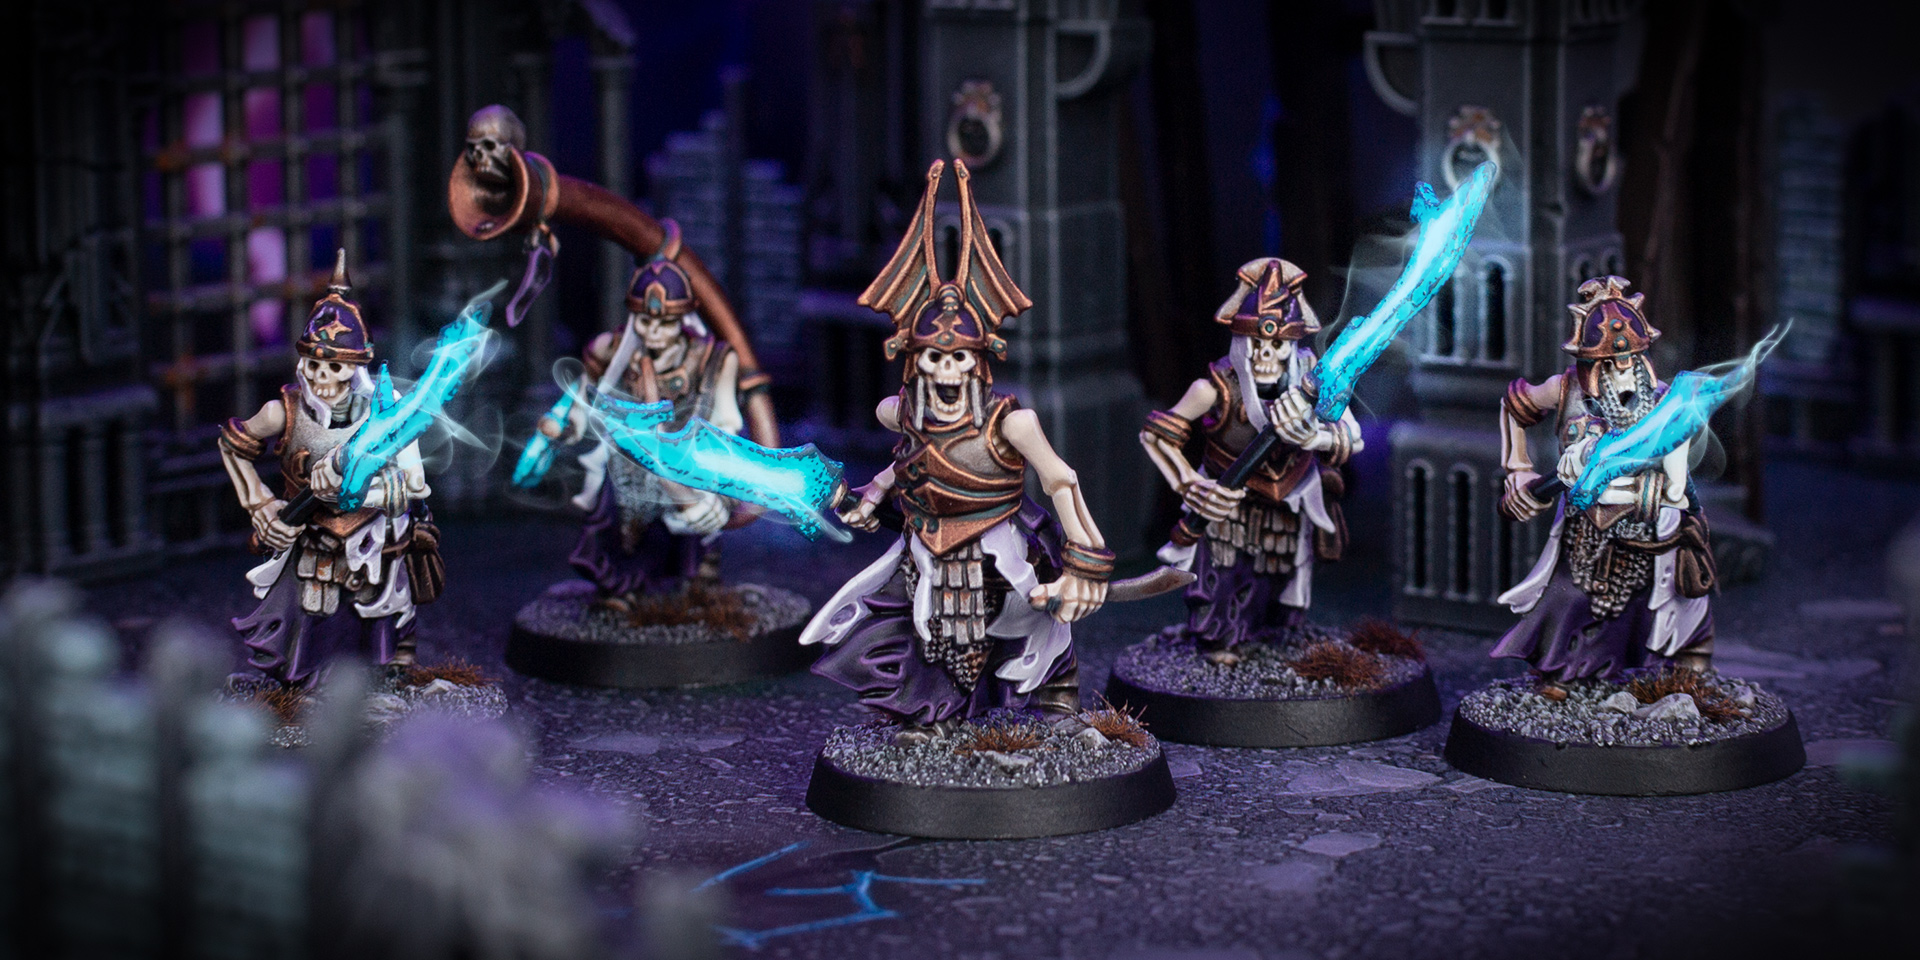 Five Grave Guard with burning Great Wight Blades